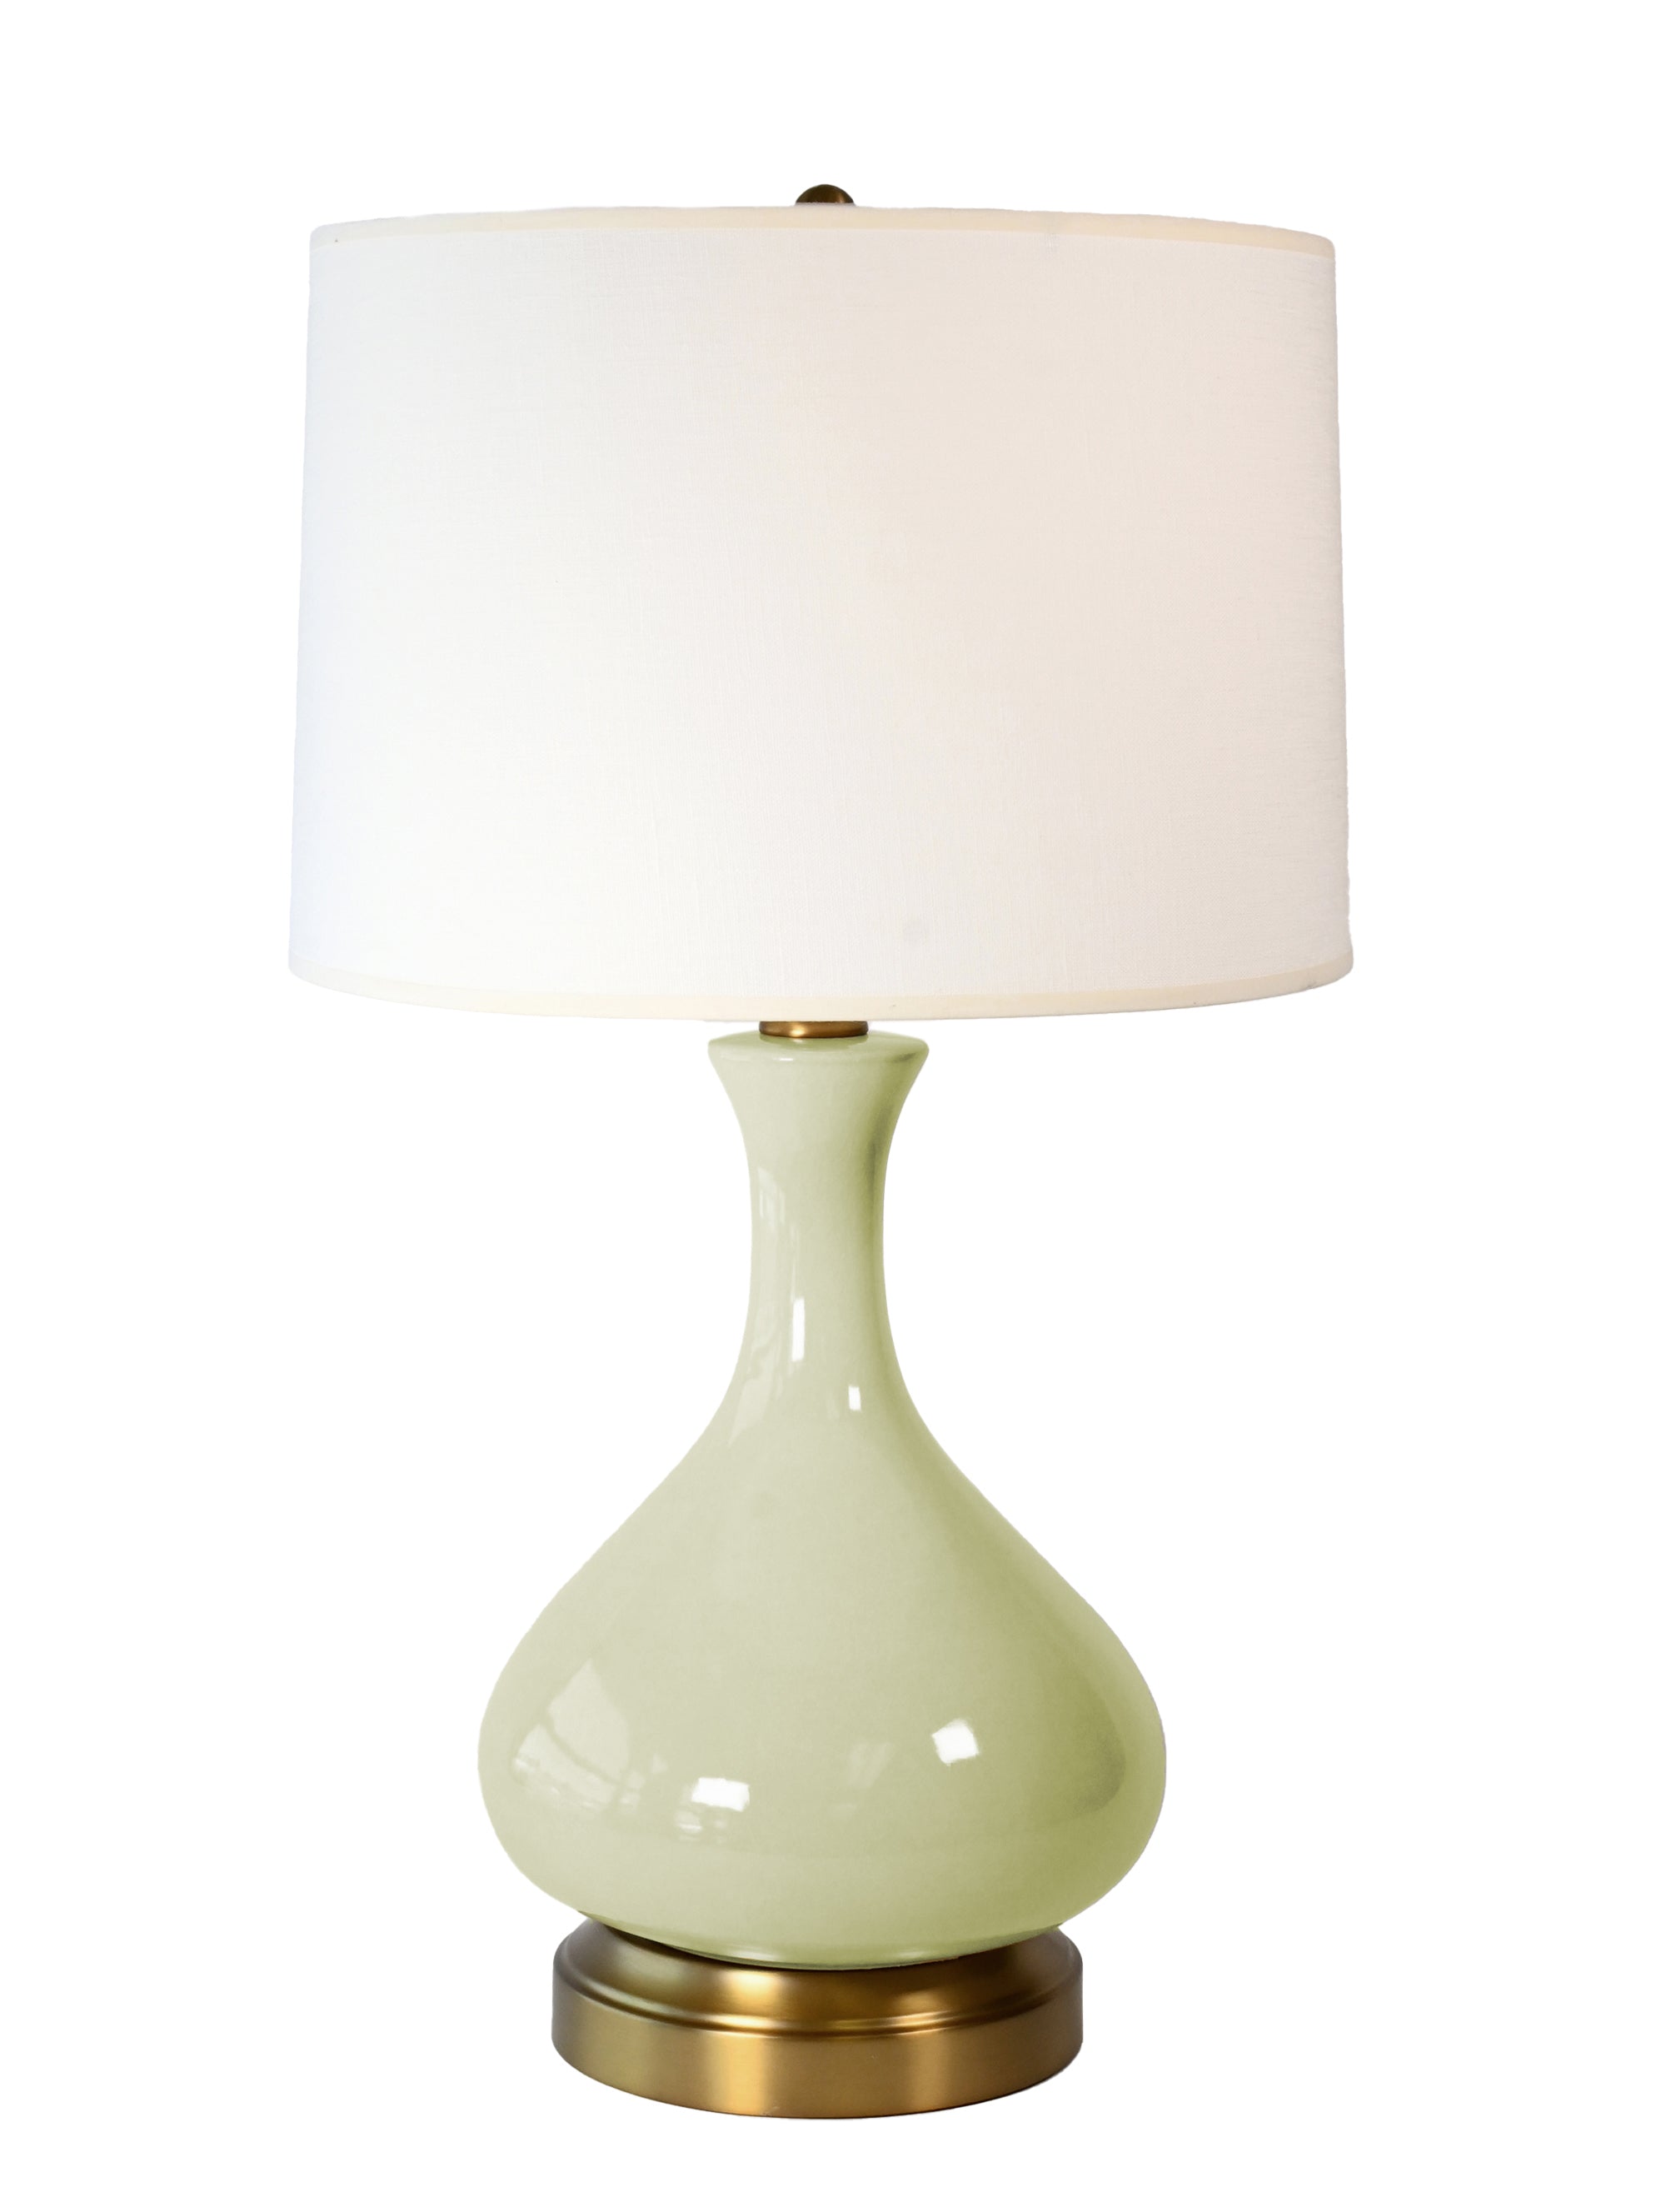 Modern high end brass table lamp with sage green shade — italian